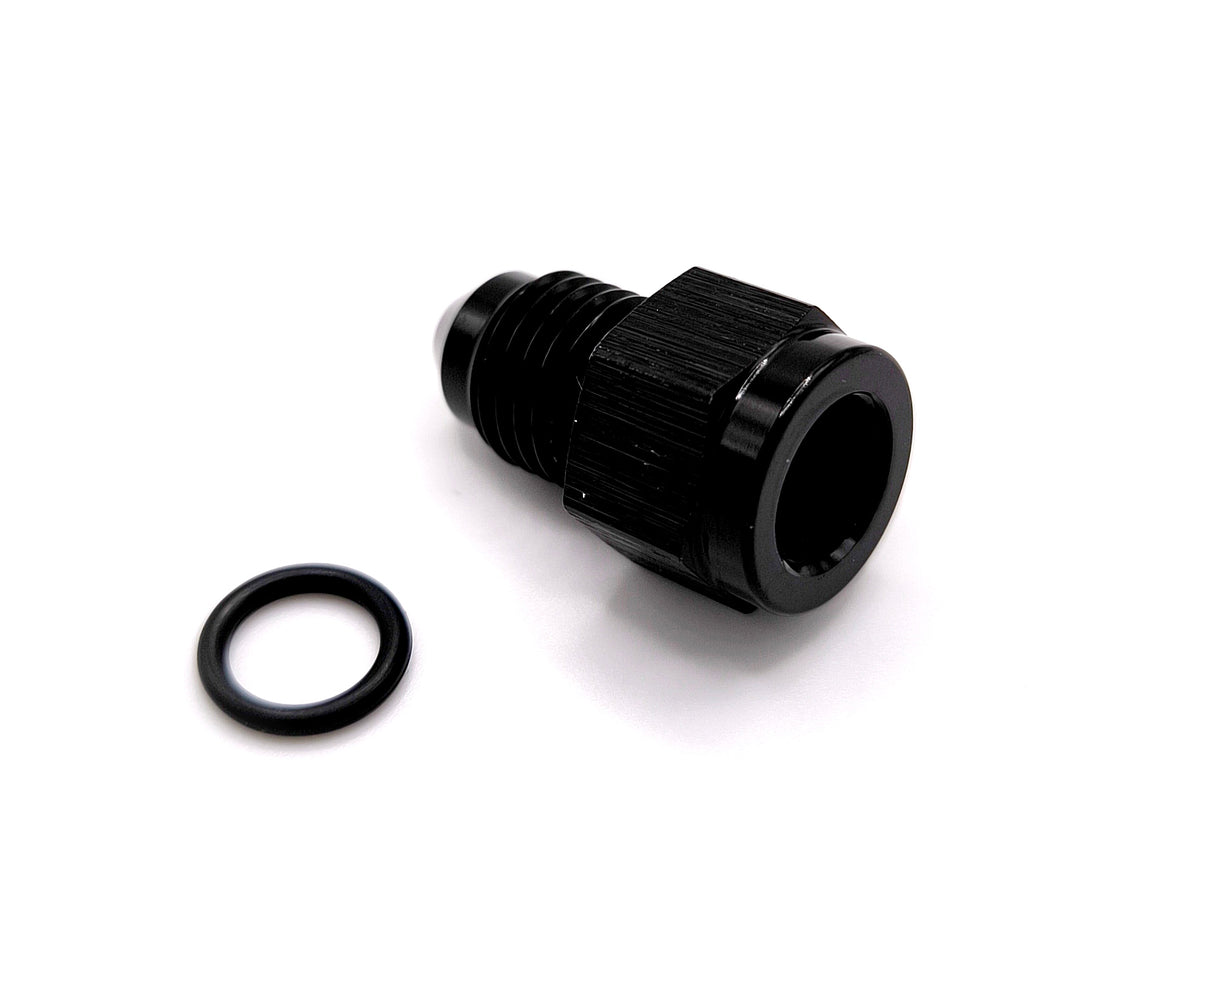 Female 1/8 NPT To Male AN3 Adapter (Black)